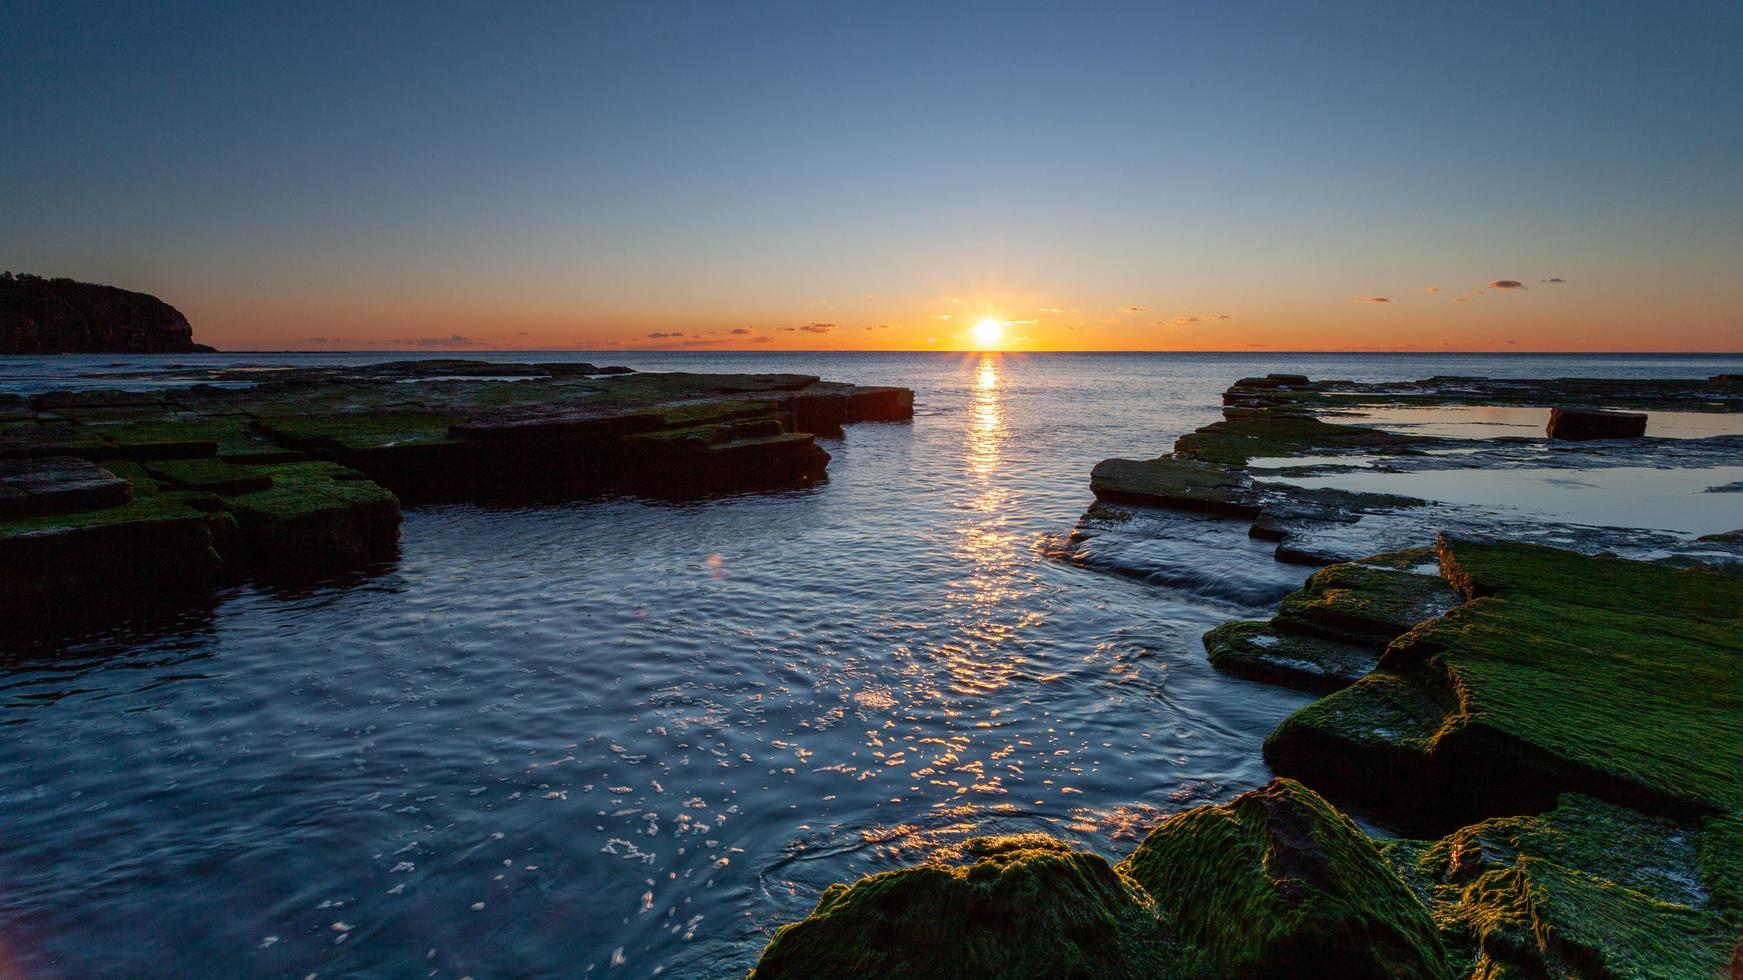 Mossy rocks near mouth of ocean during sunset photo